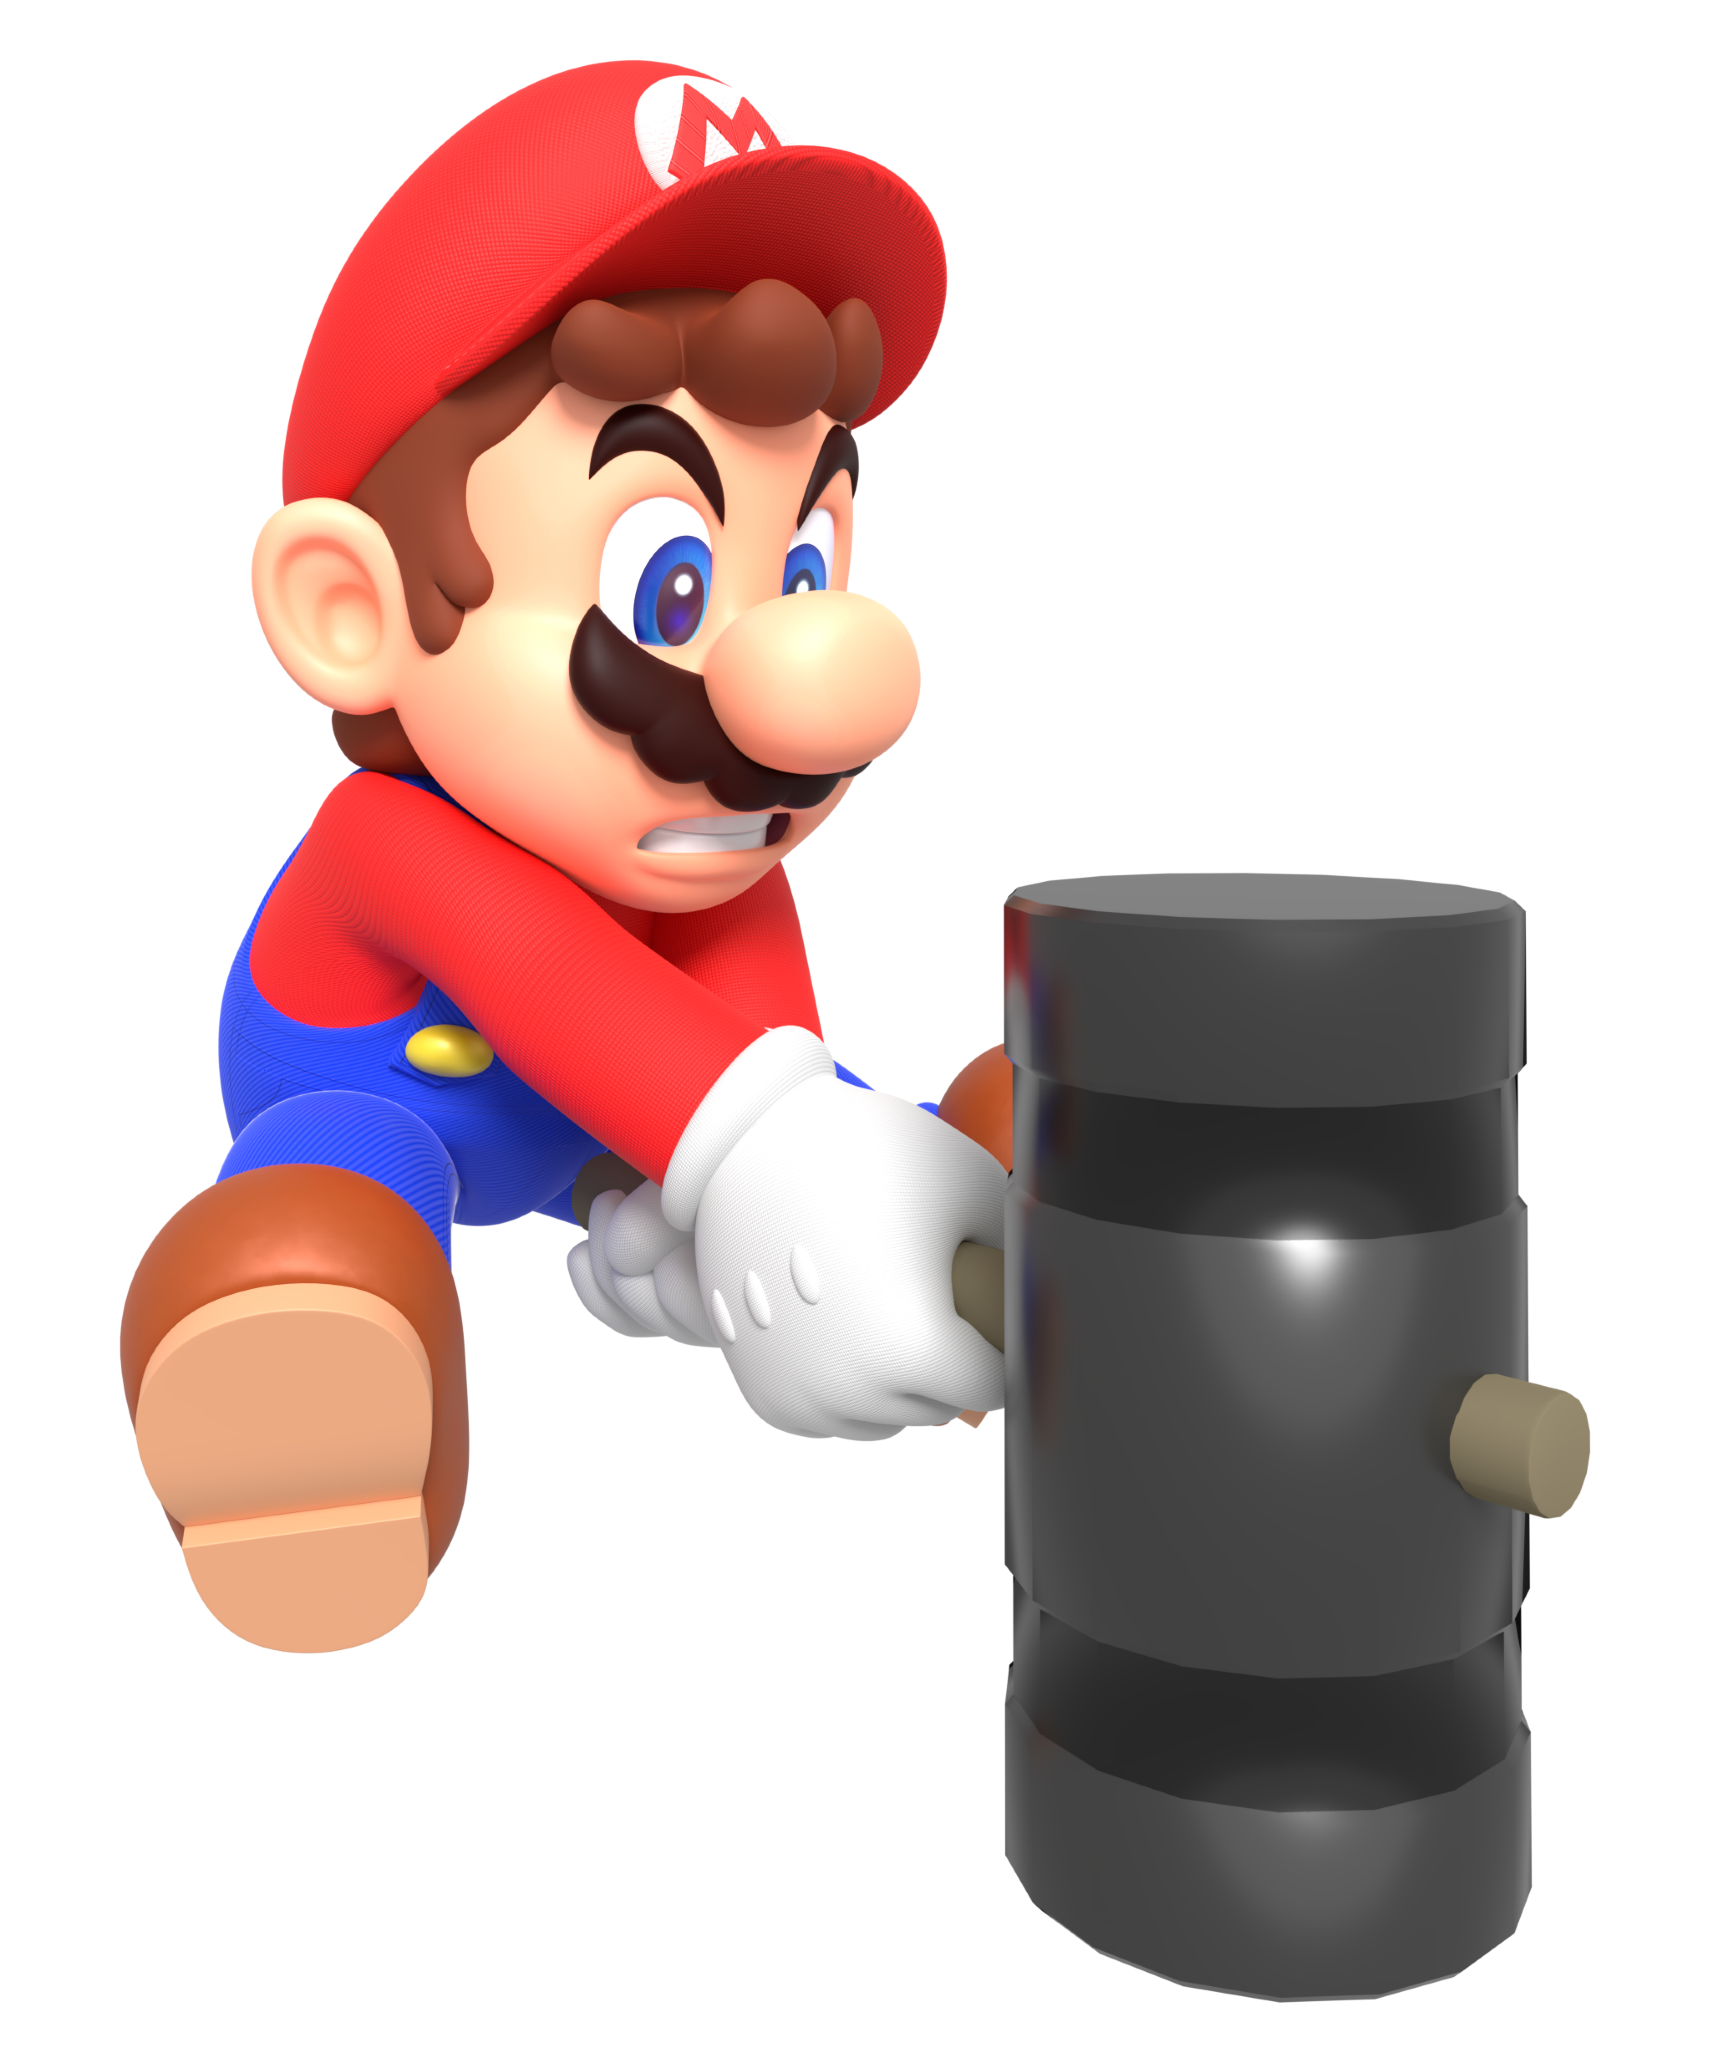 Mario hits with a hammer Blank Meme Template